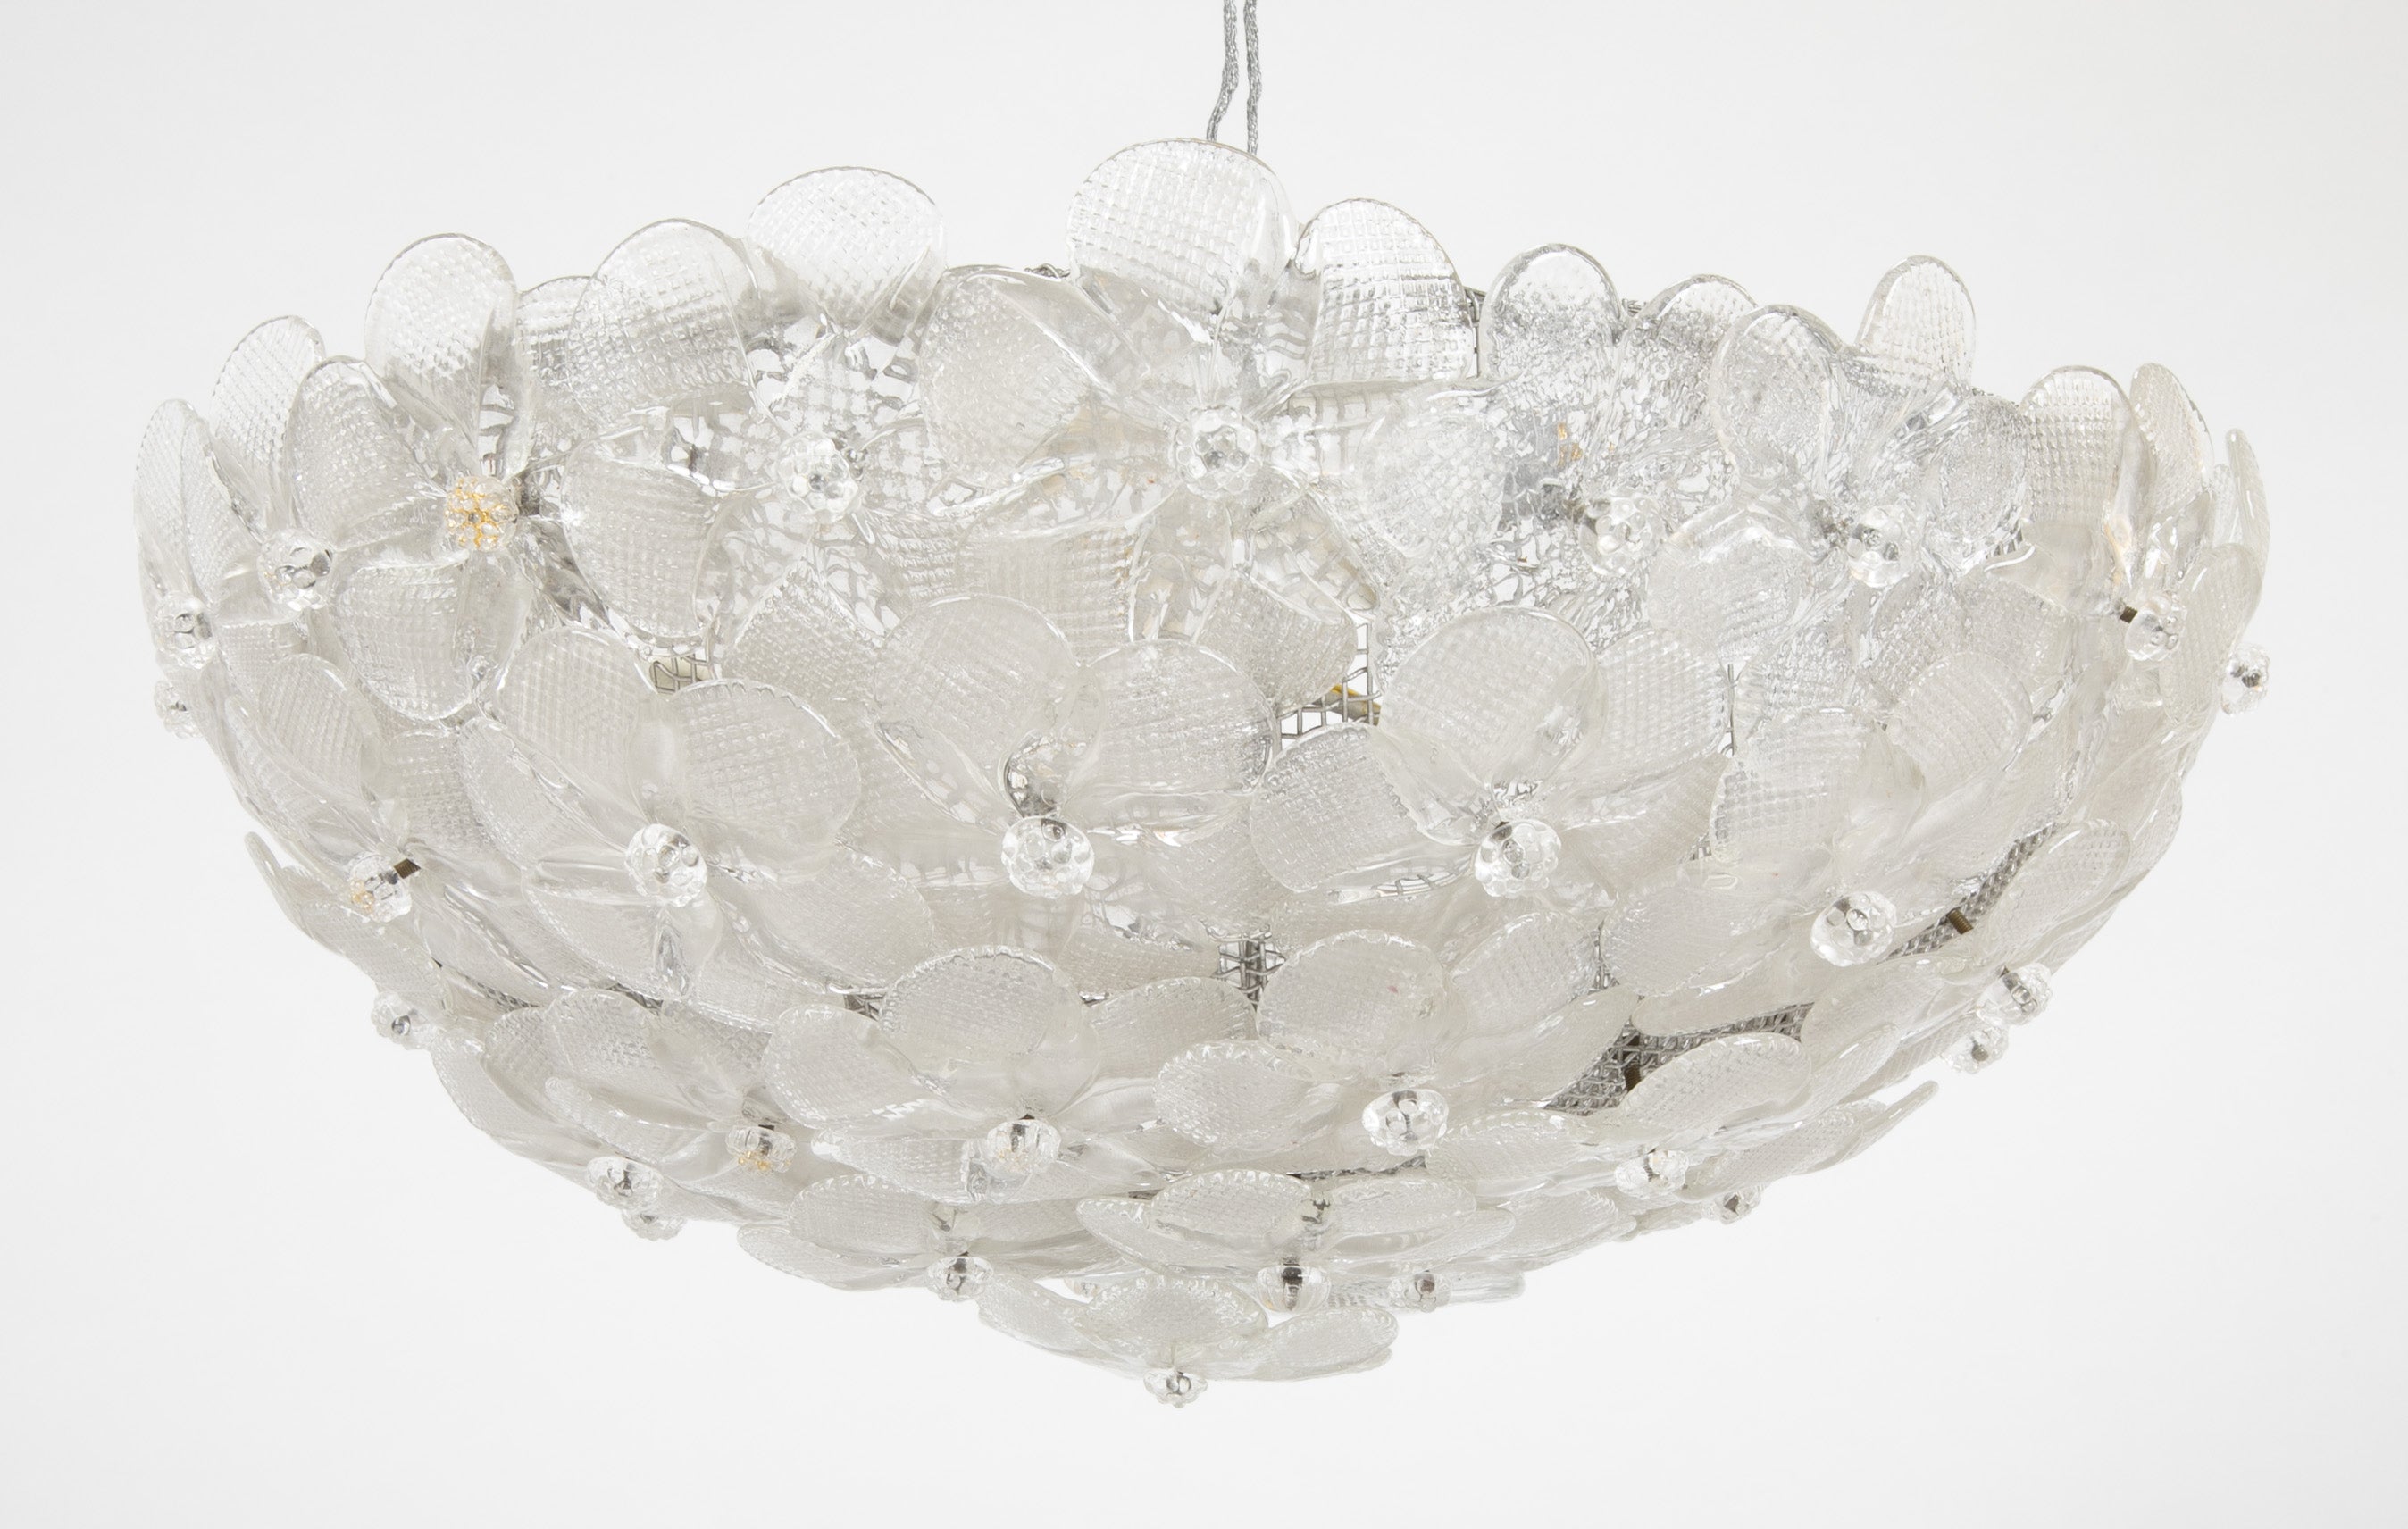 Barovier Toso Murano Glass Ceiling Fixture Avery Dash Collections